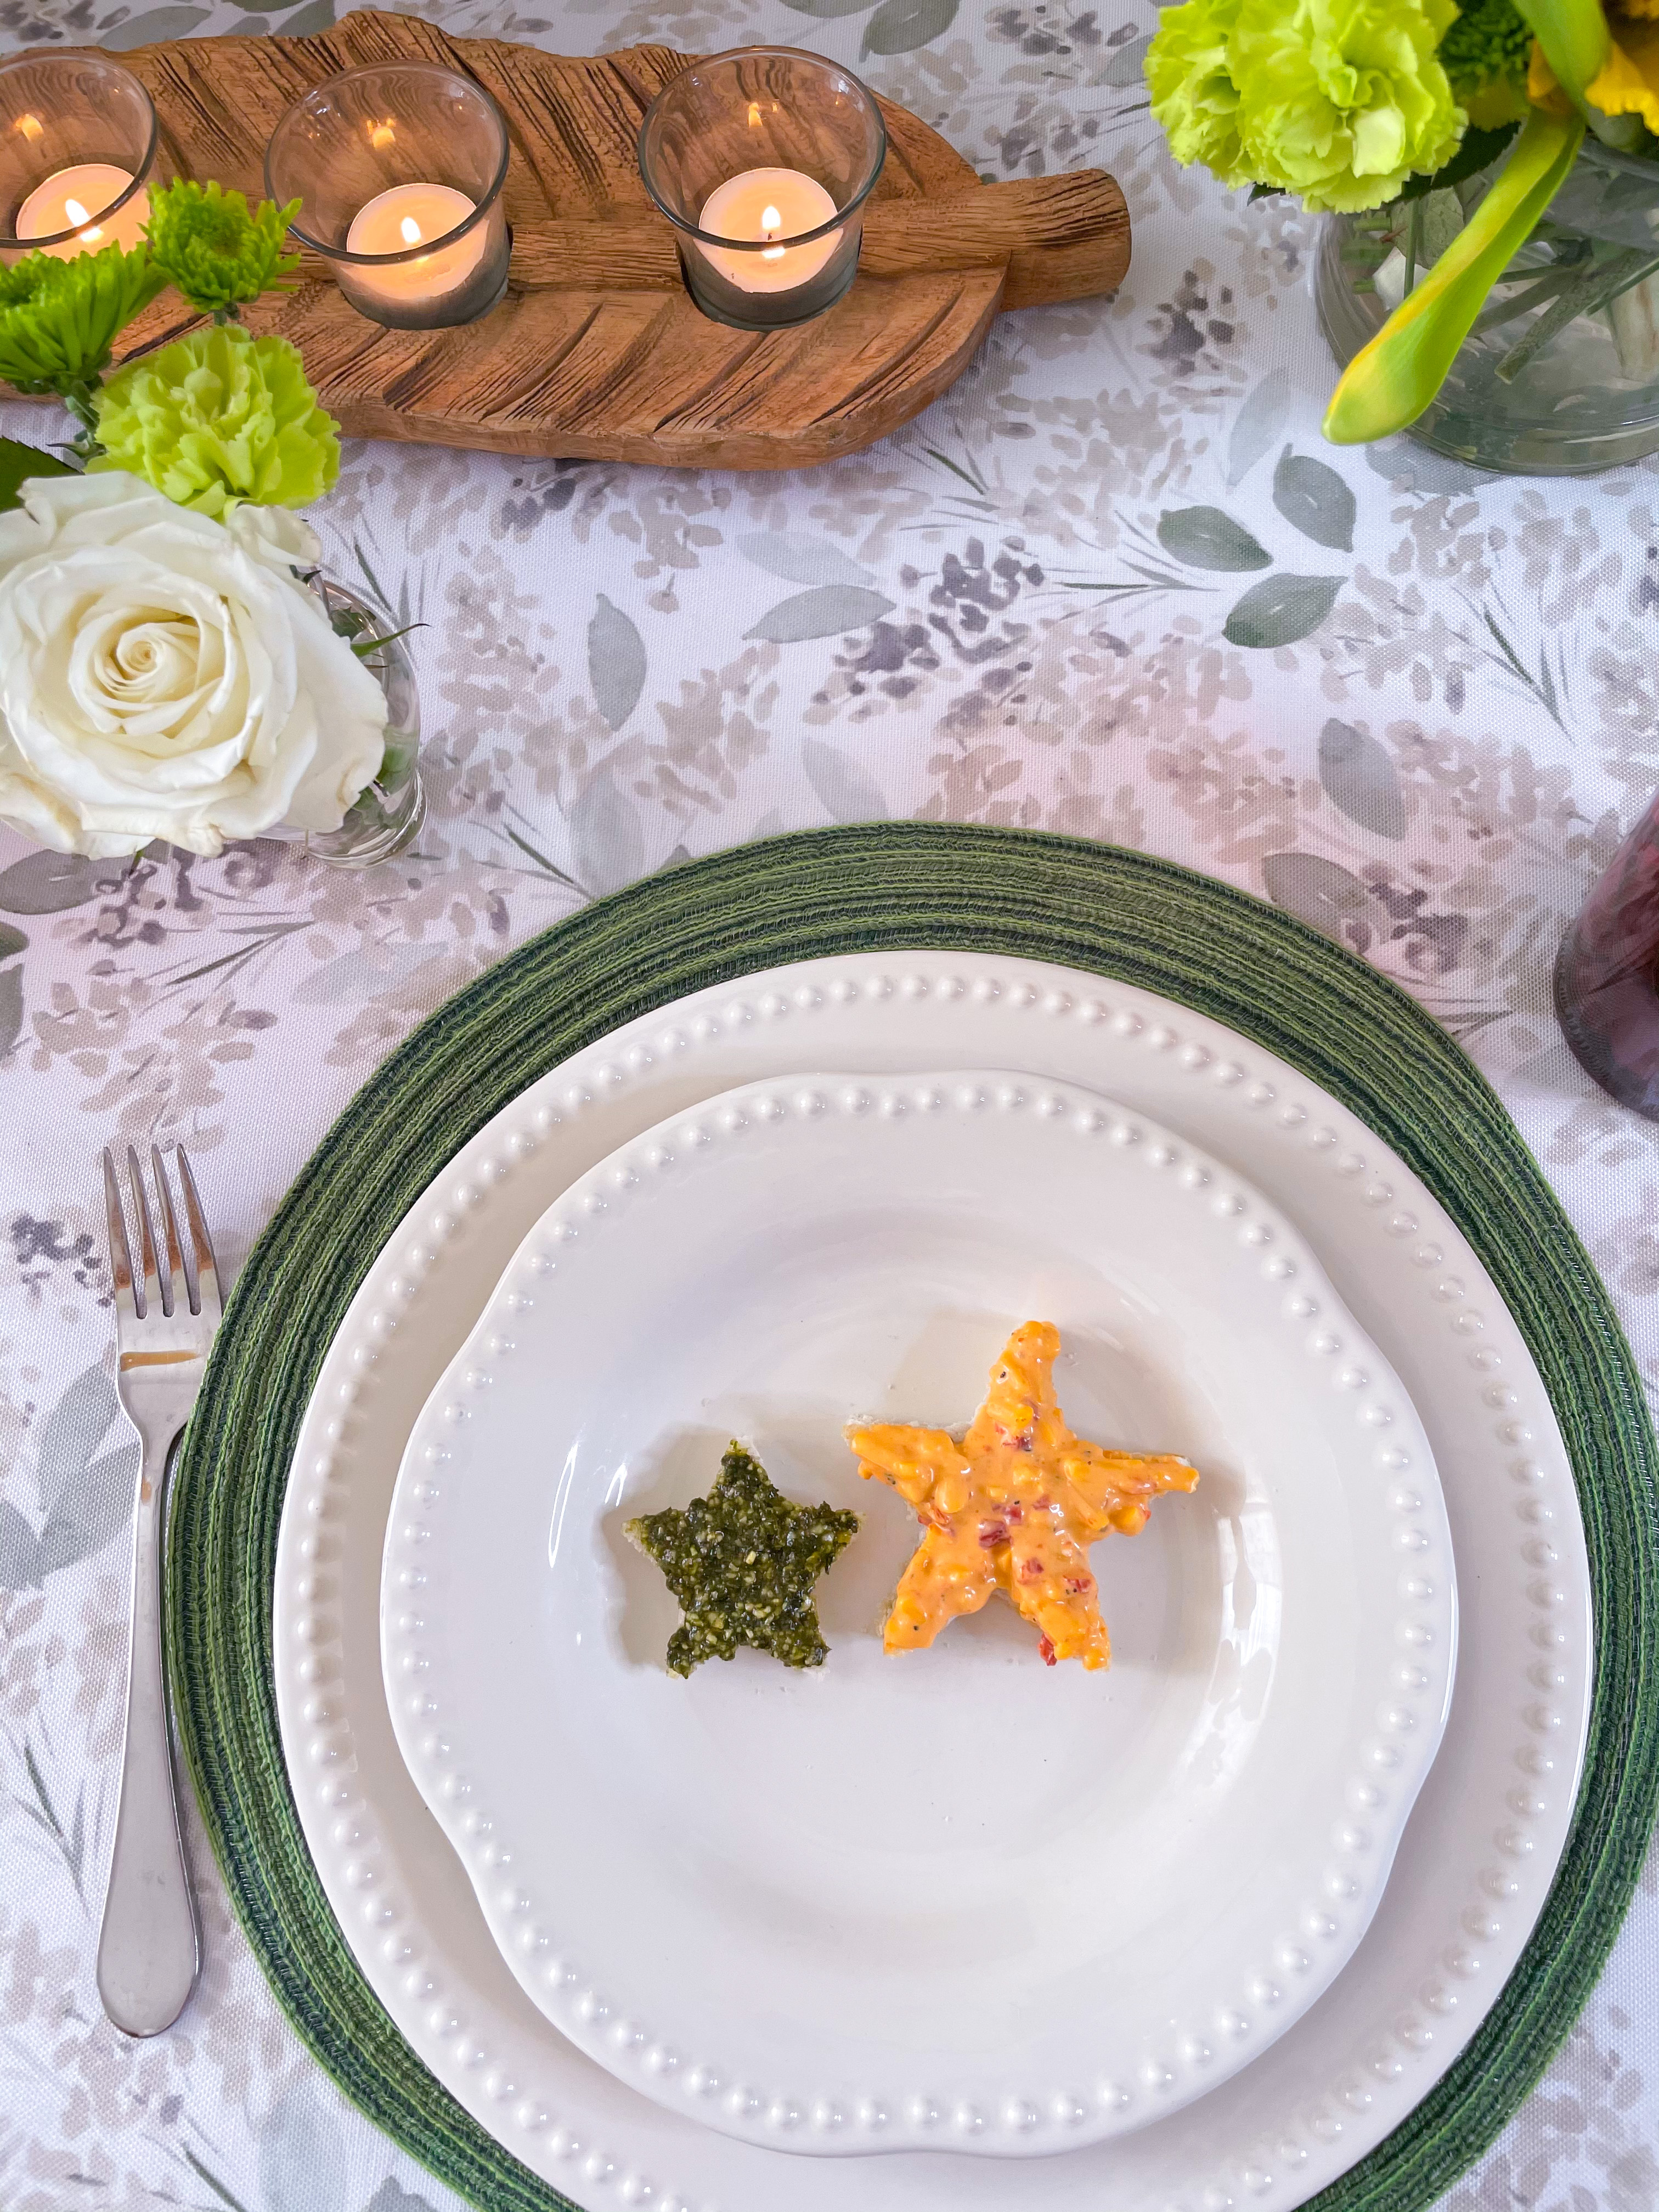 Second Star to the Right Crostini | Disney Peter Pan Party Recipes